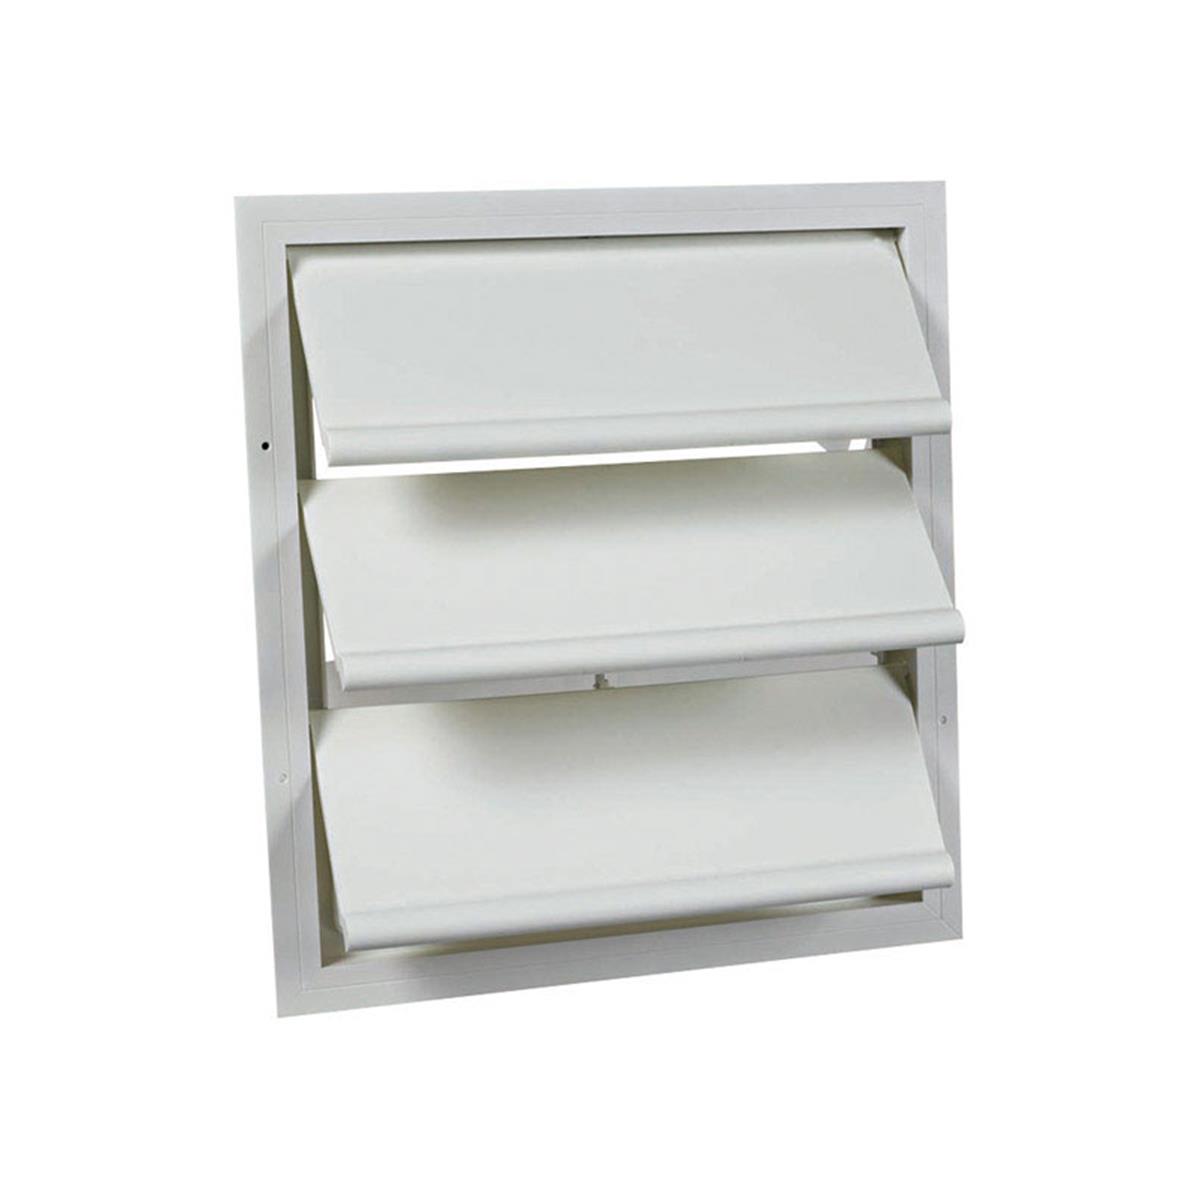 Picture of Air Vent 54703 Auto Gable Shutter  White